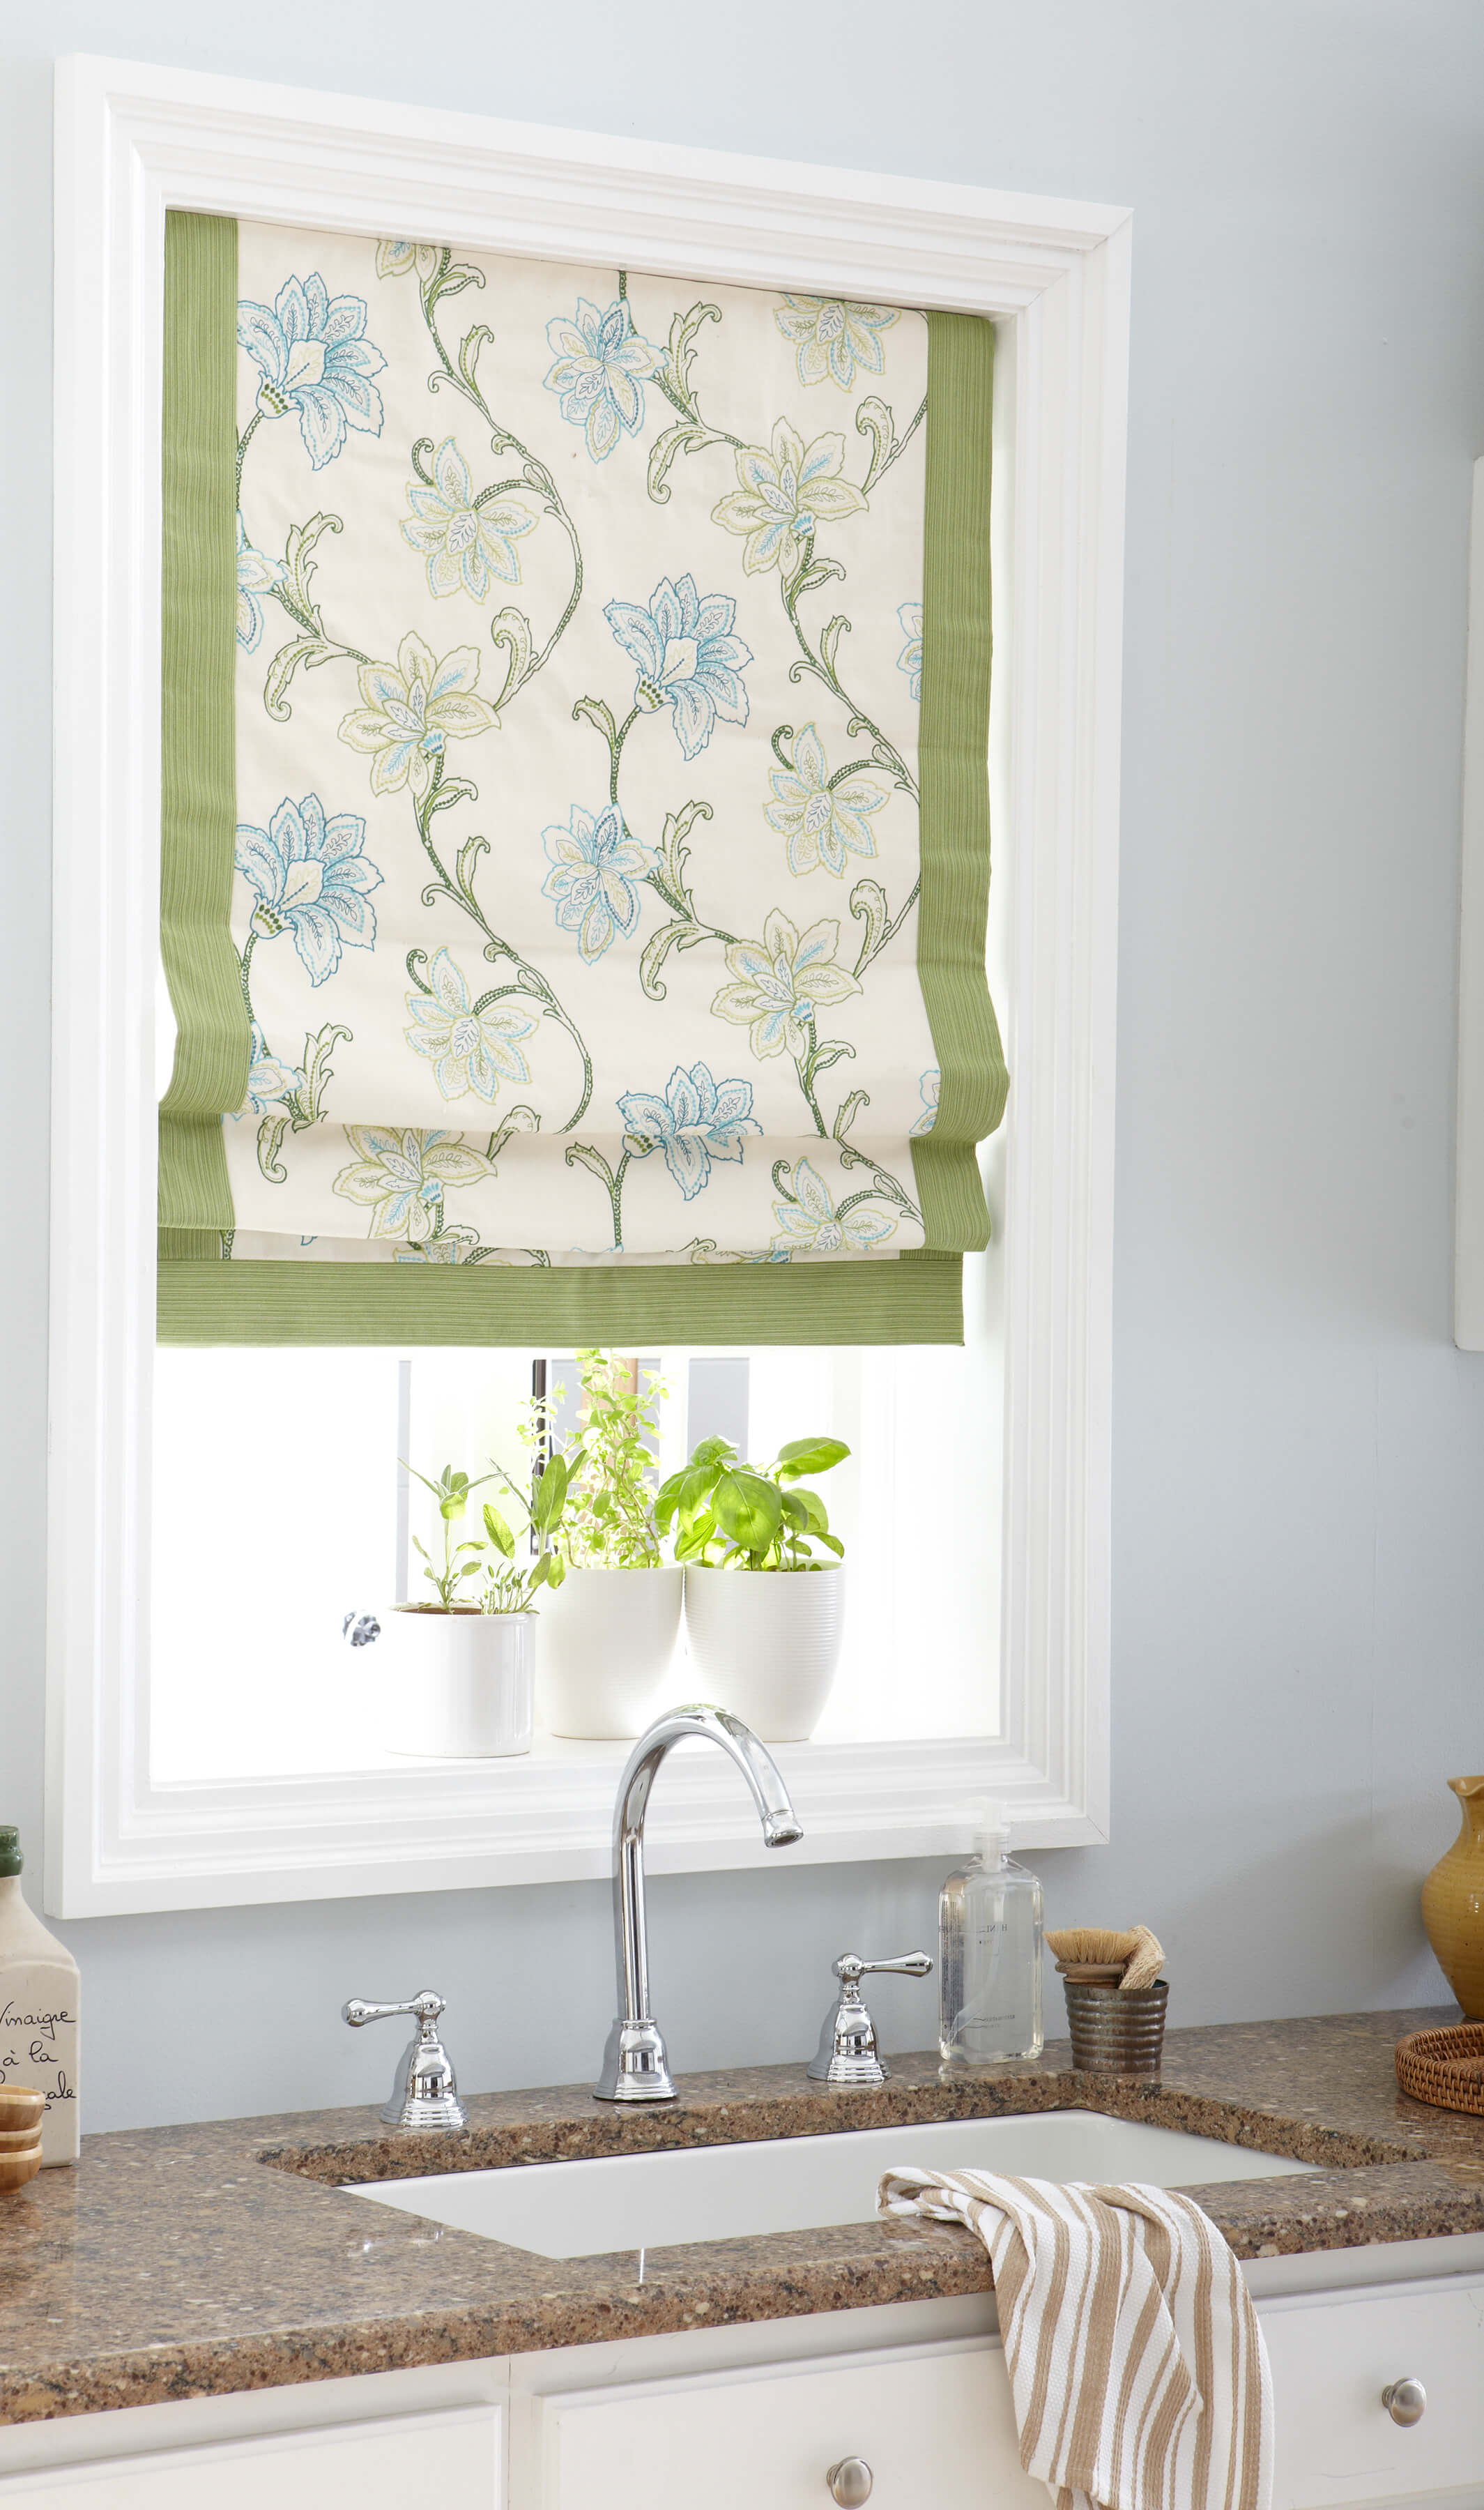 Roman shades are made from a variety of materials so it is important use cleaners that will not damage the treatment. 